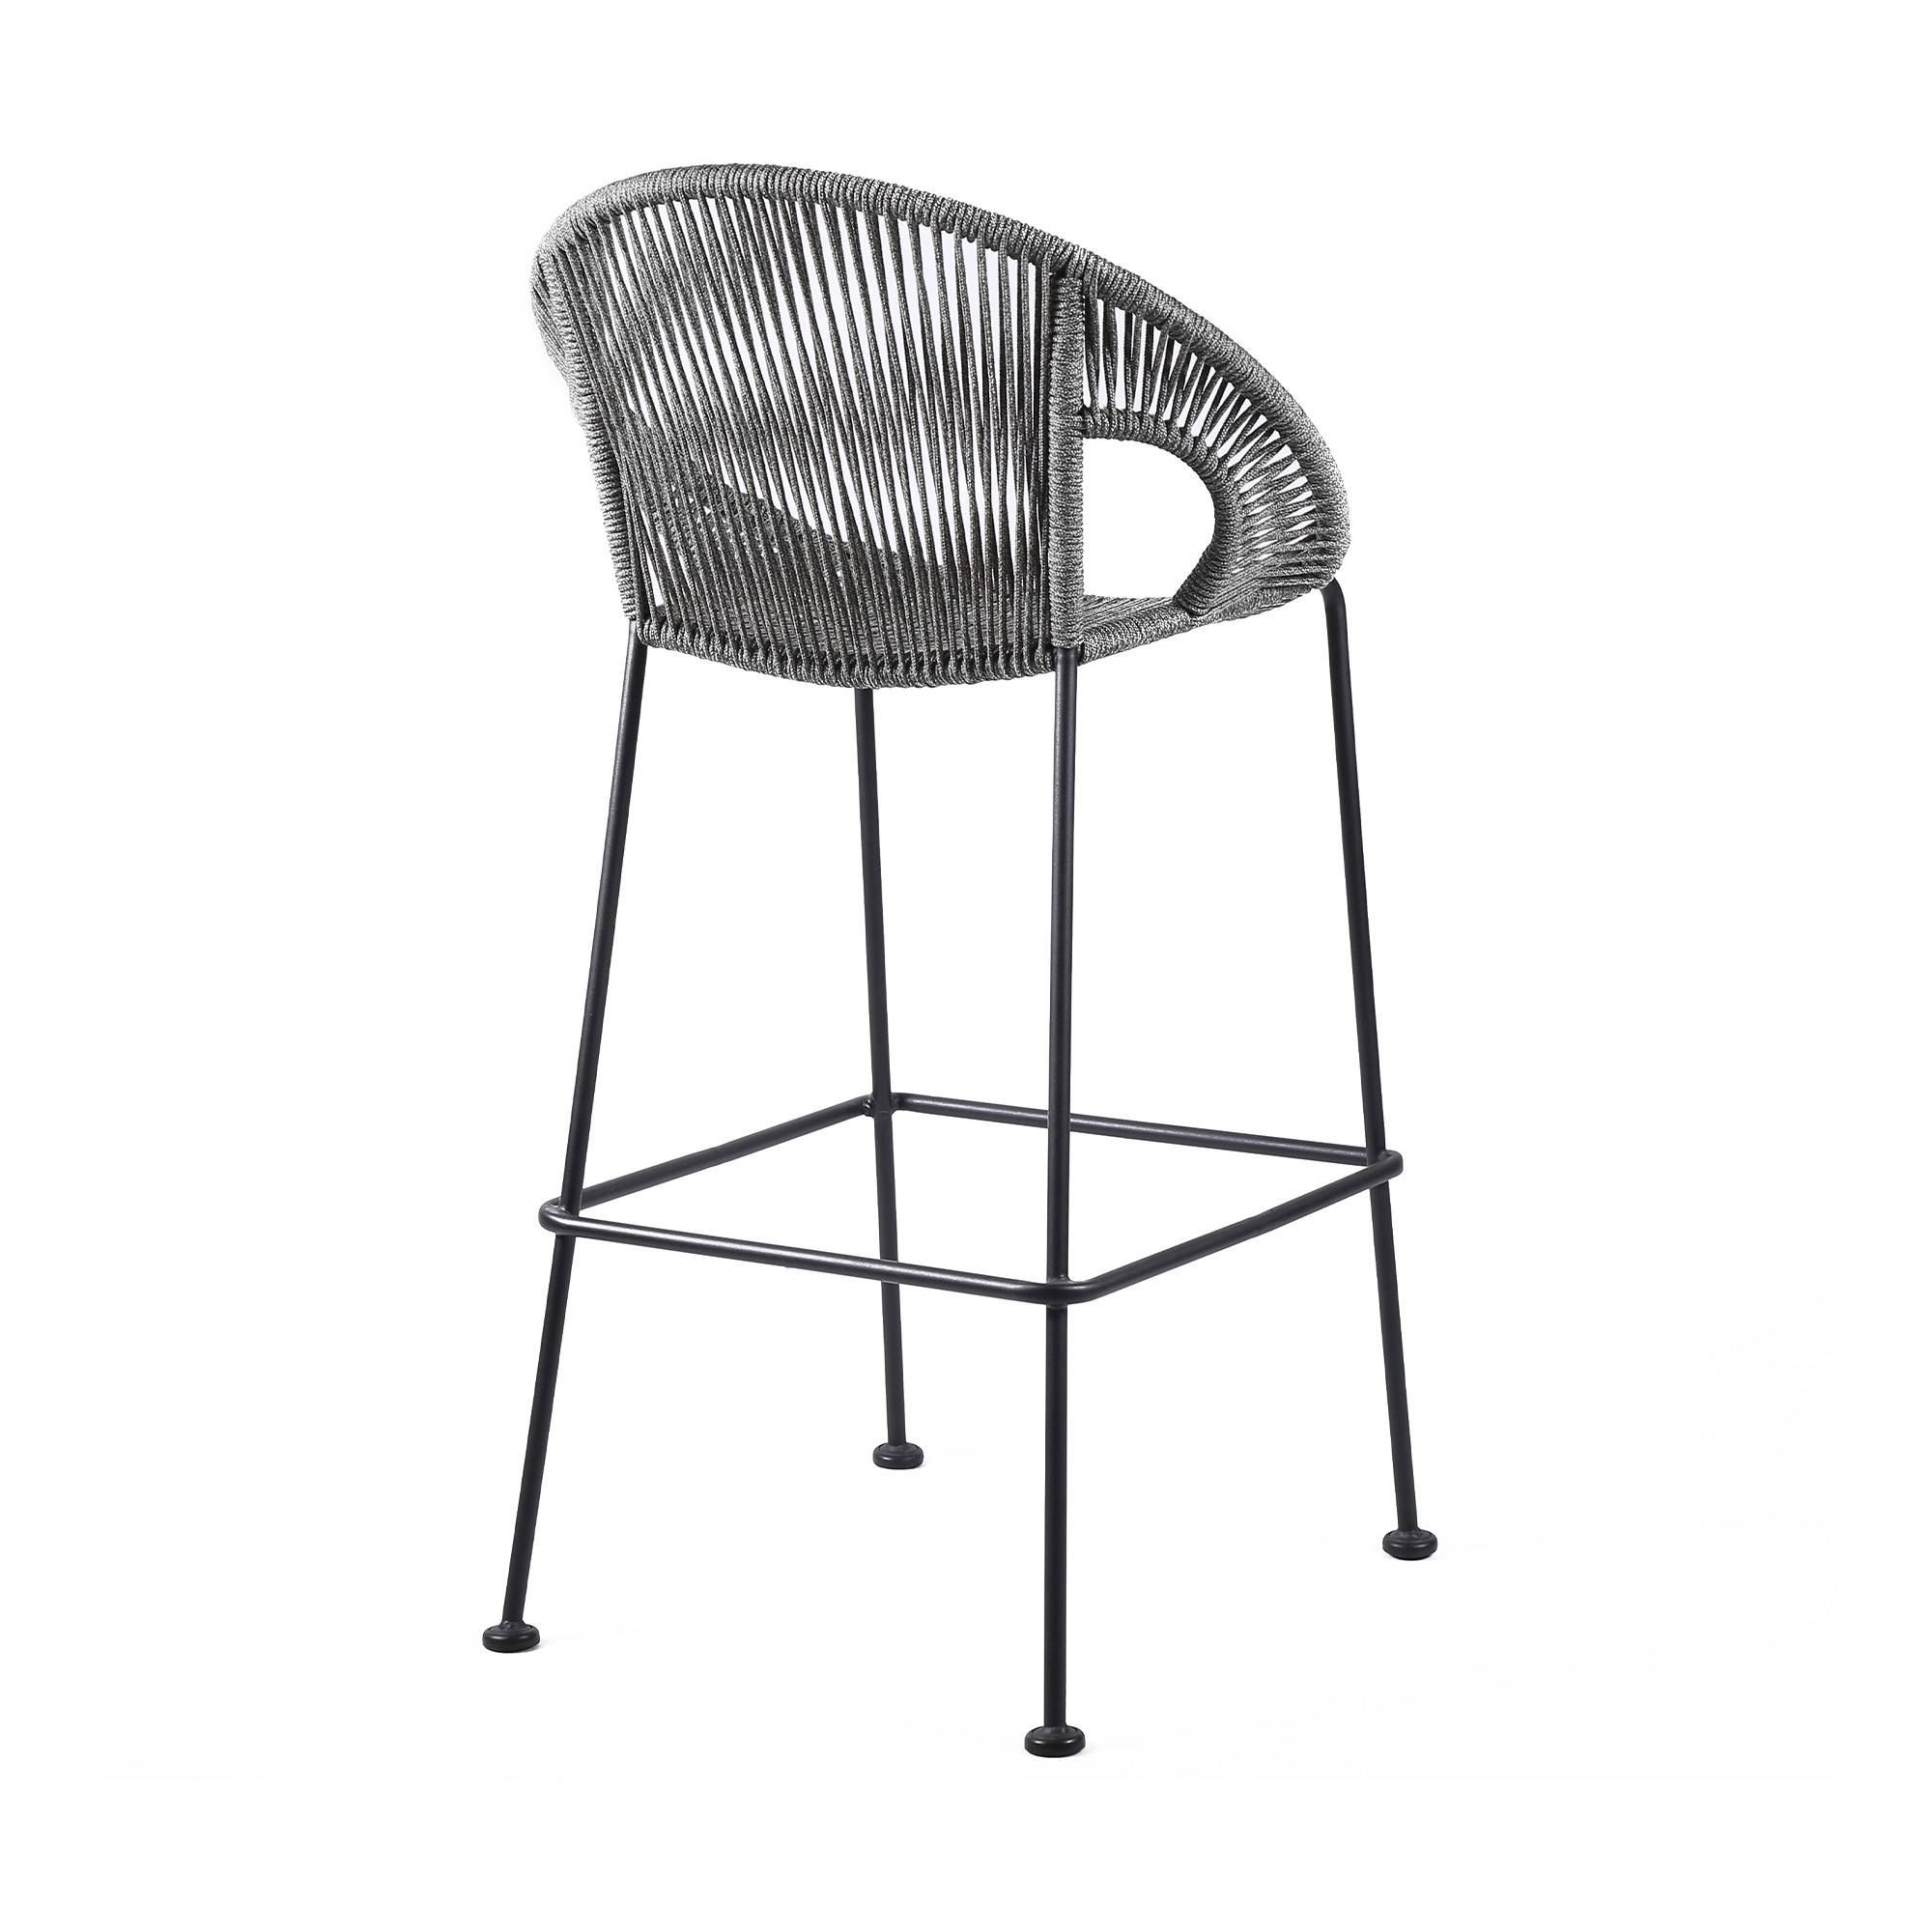 Indoor Outdoor Bar Stool With Rounded Rope Woven Seat, Gray- Saltoro Sherpi